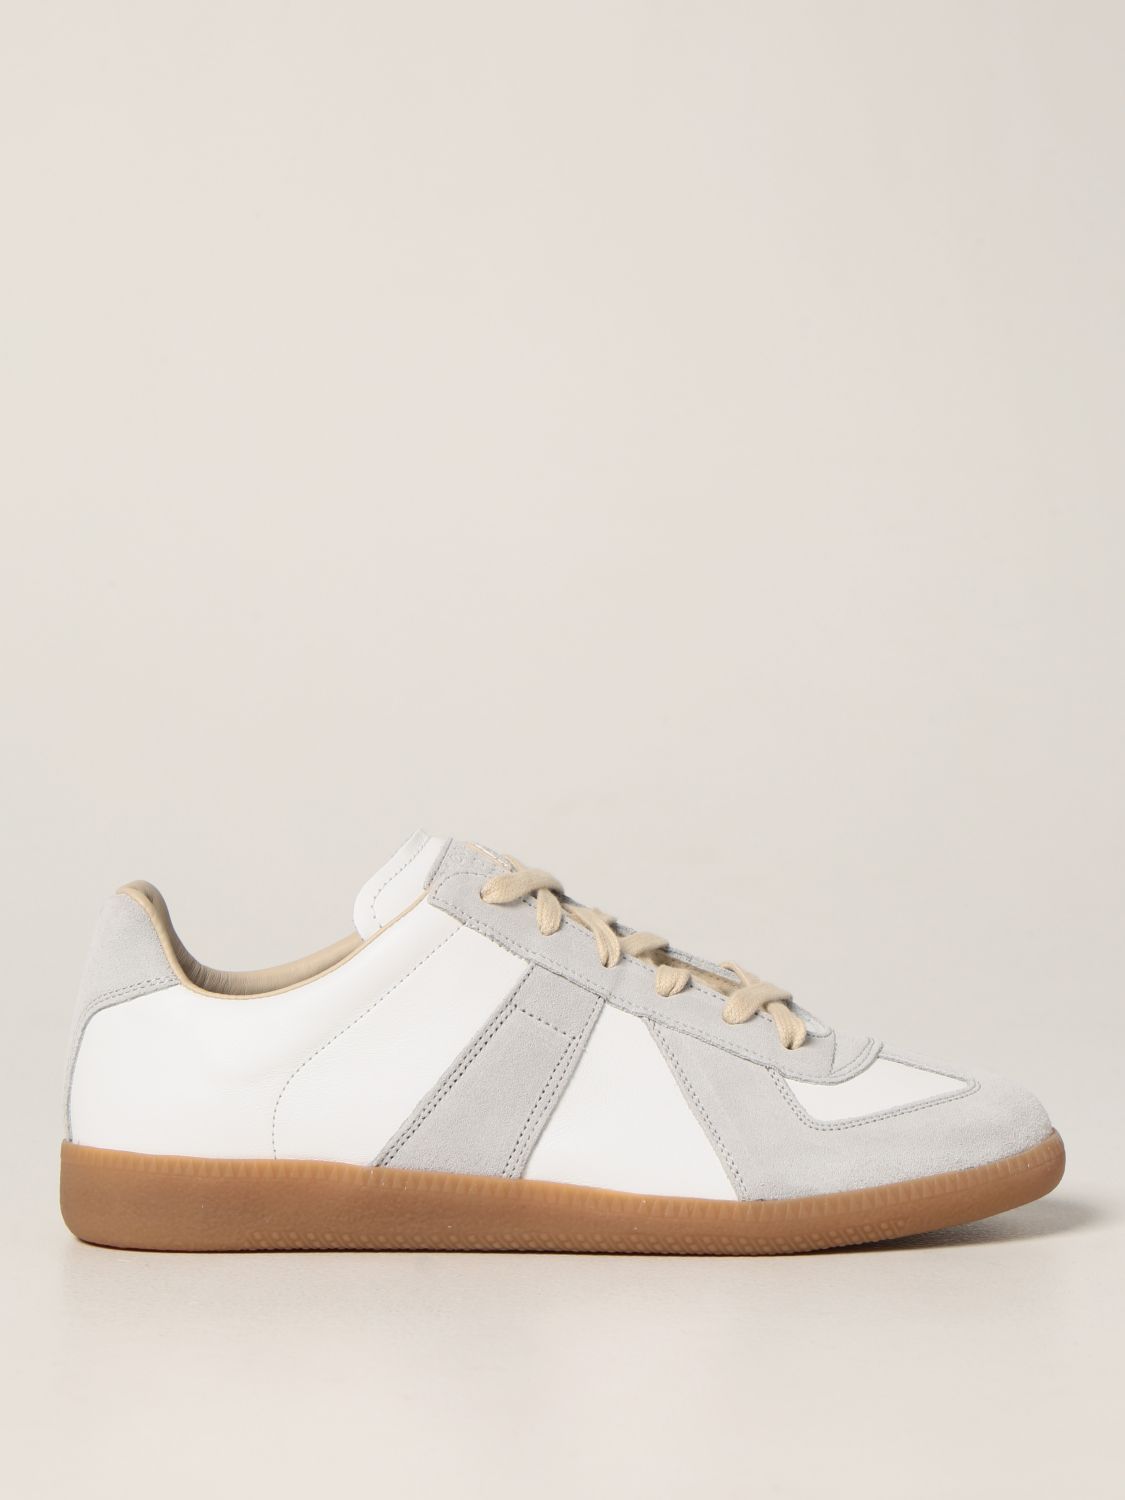 MAISON MARGIELA: Replica suede and leather White | Maison Margiela sneakers S57WS0236P1895 online GIGLIO.COM